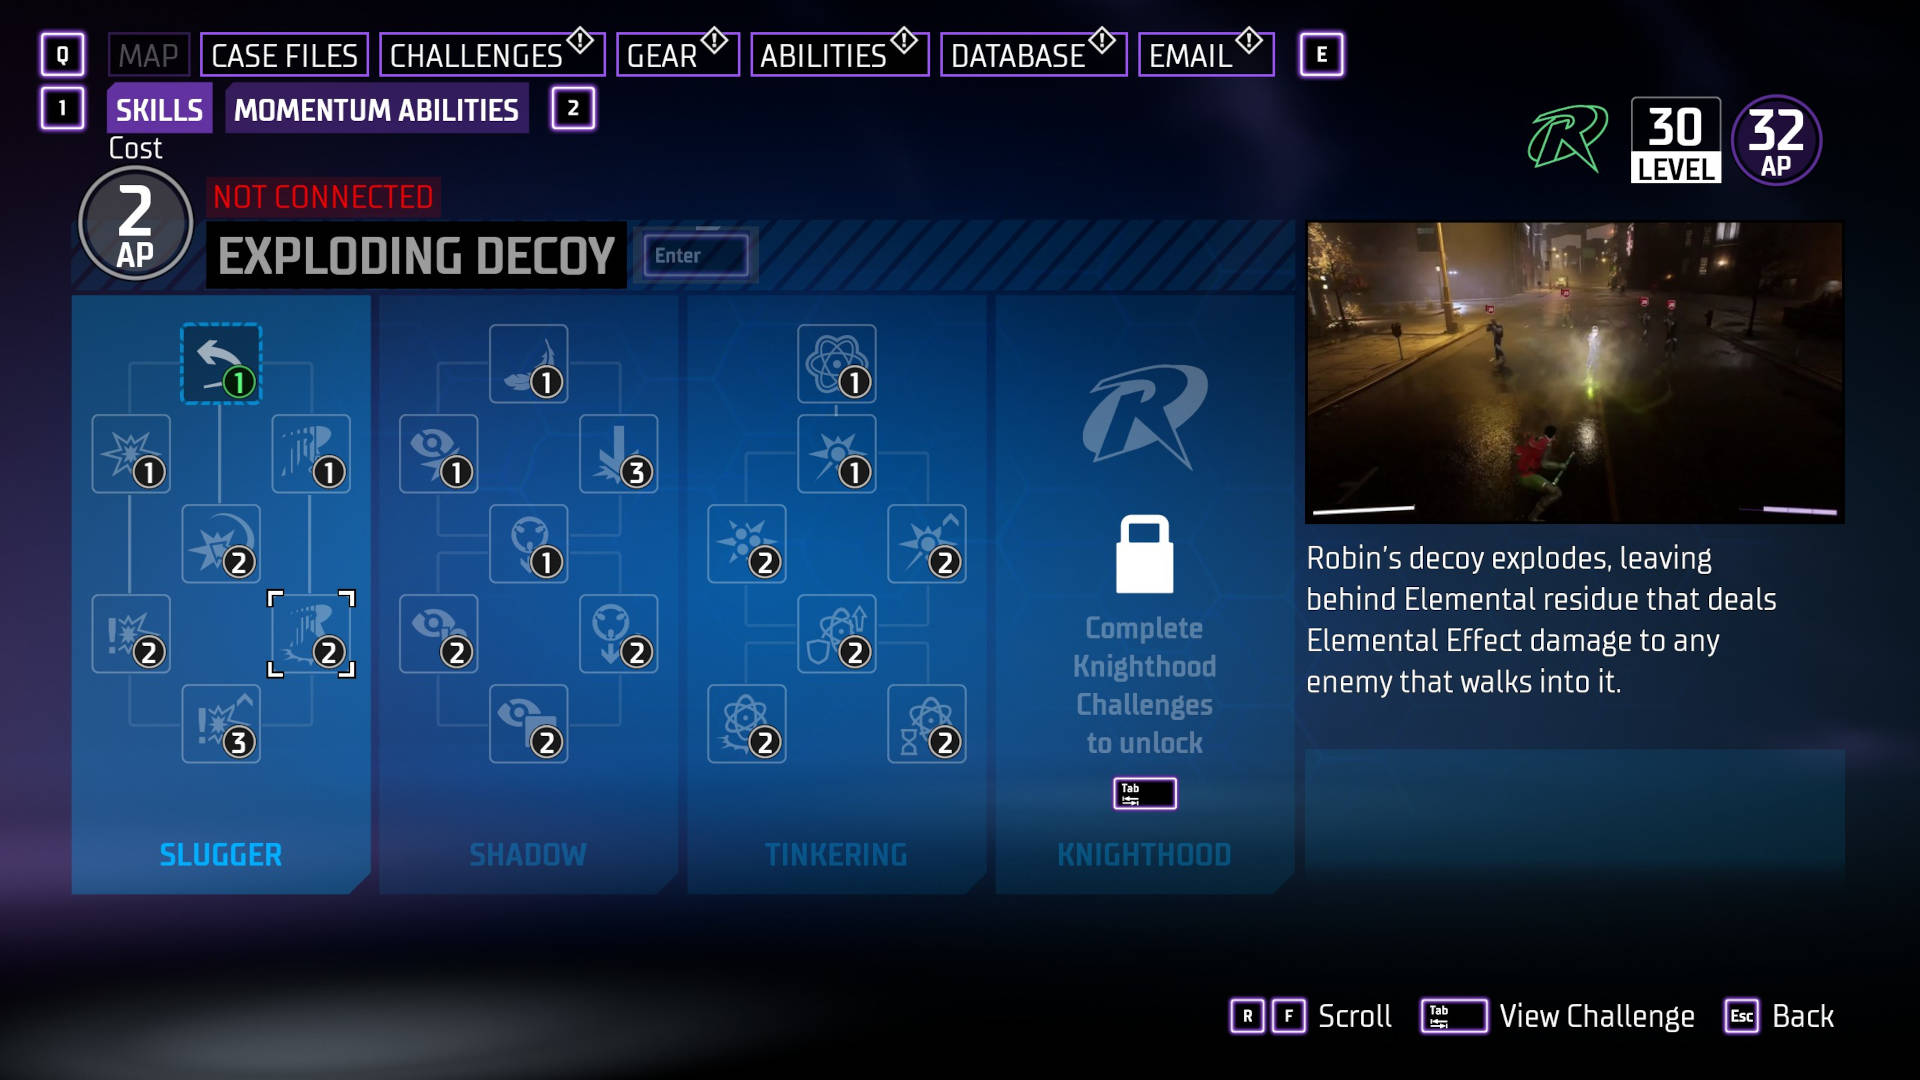 Gotham Knights abilities: Robin's ability tree. A window on the right side of the screen shows the Exploding Decoy skill in action.